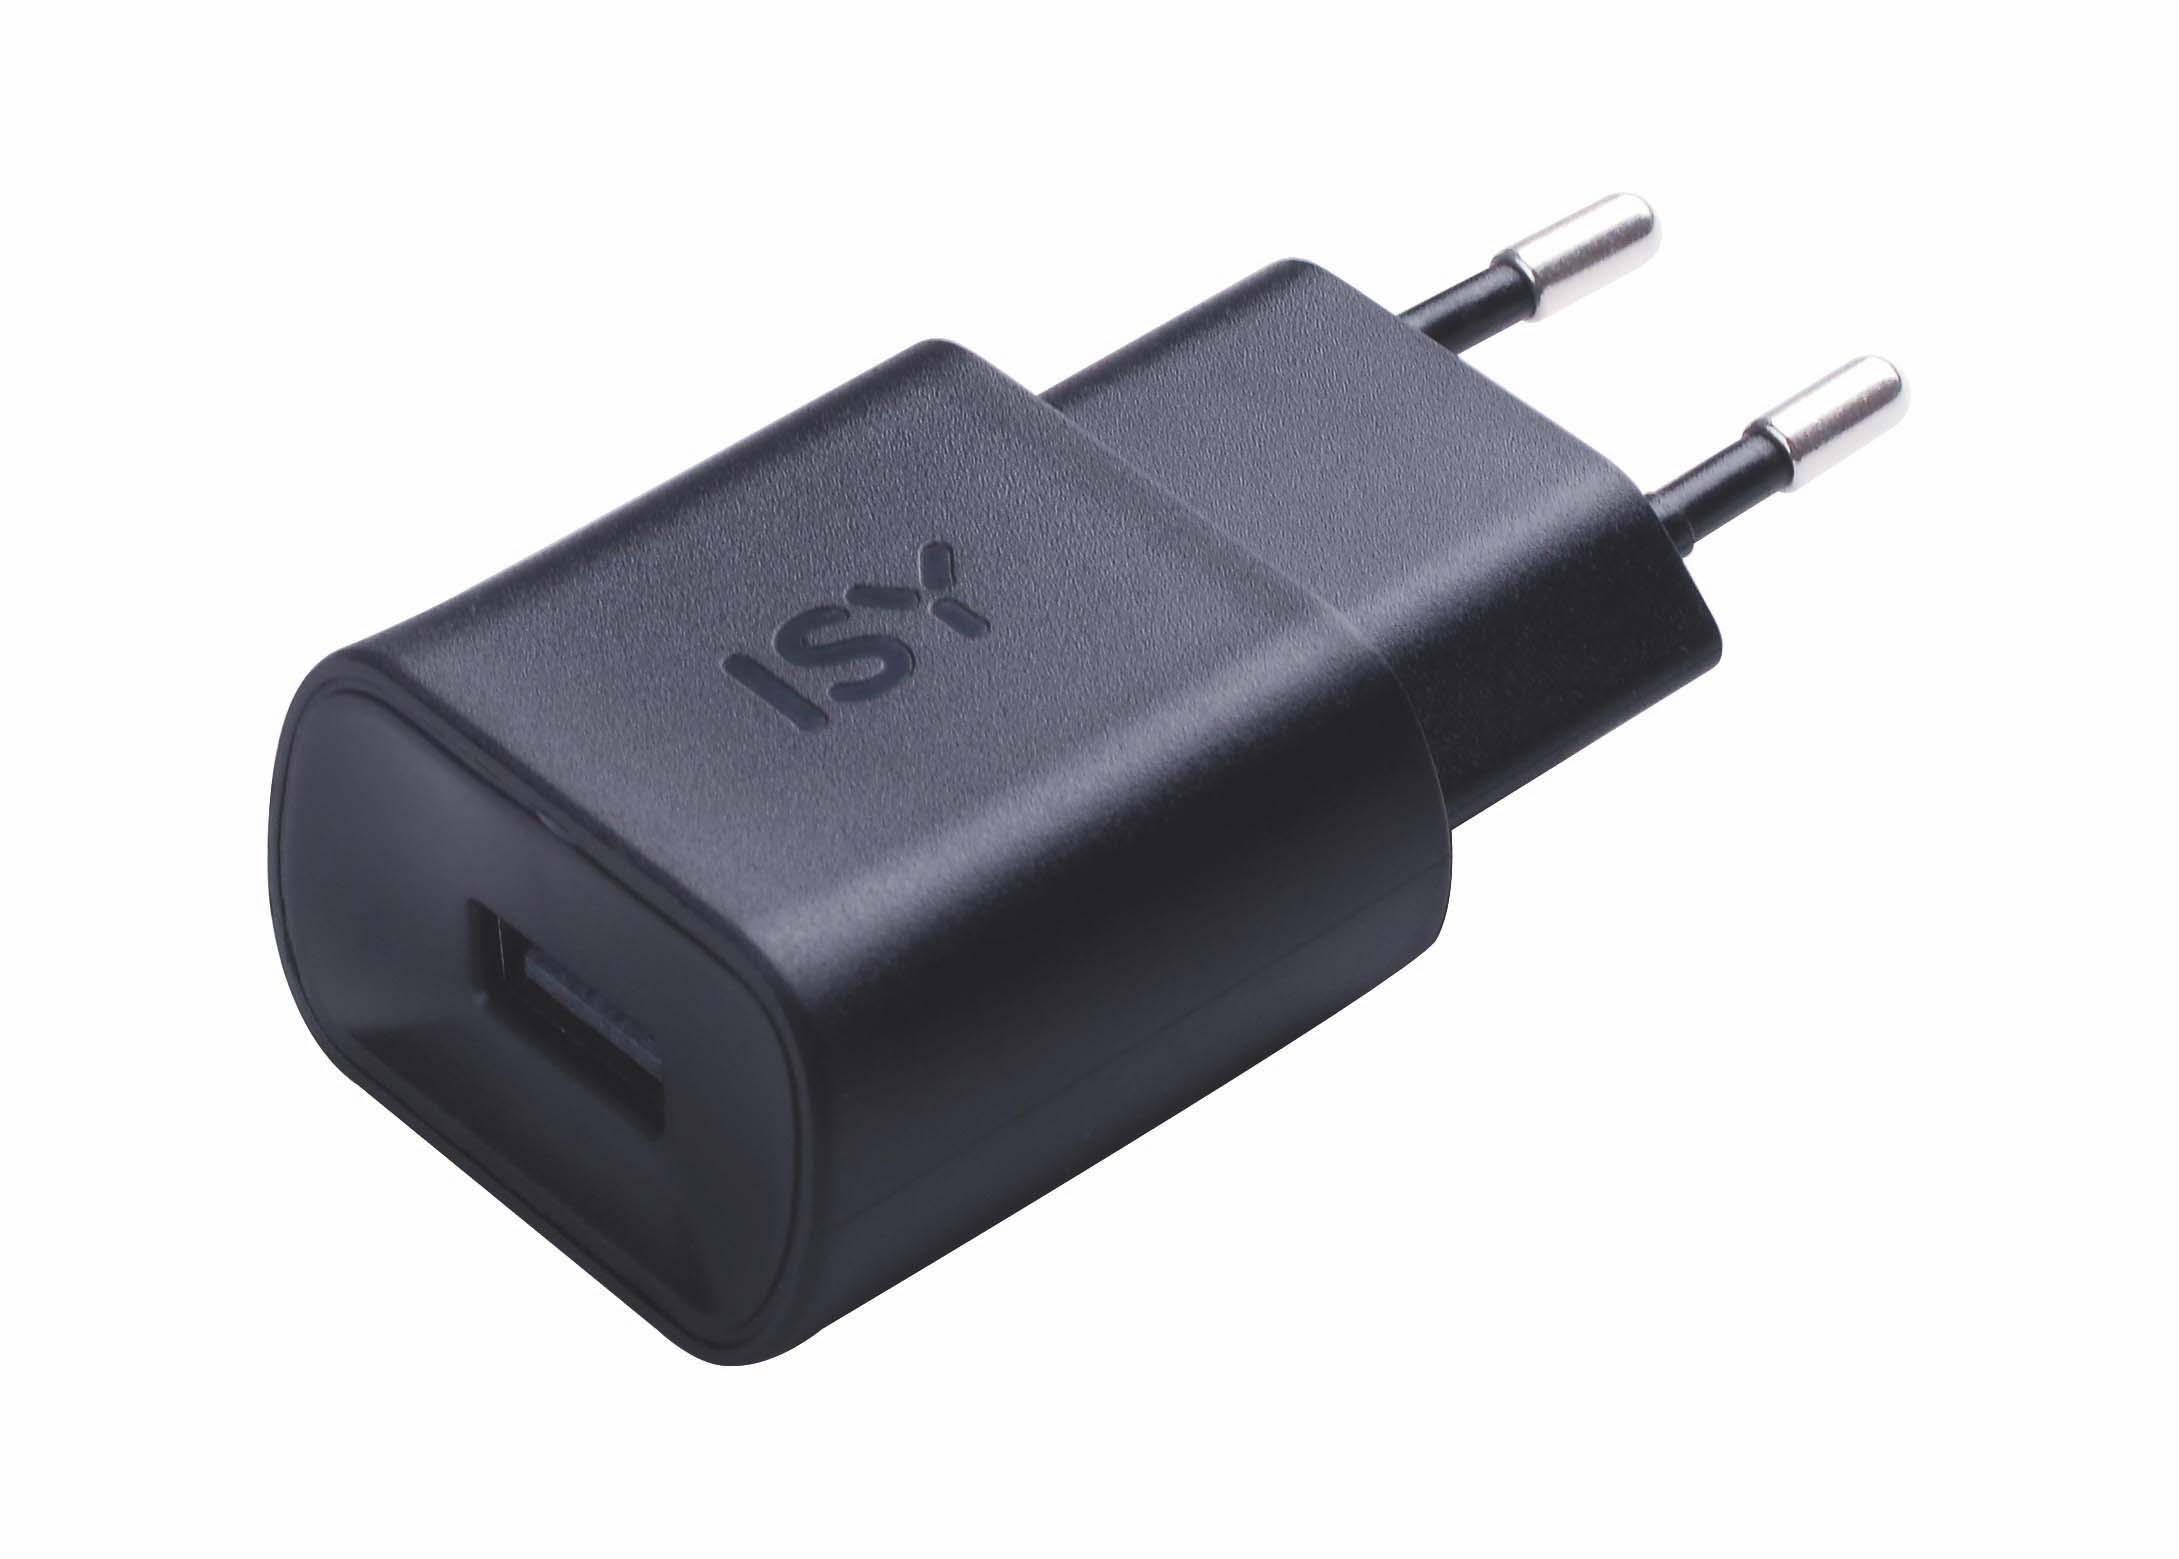 Wall USB 1.2 Wall Charger Charger ISY A USB